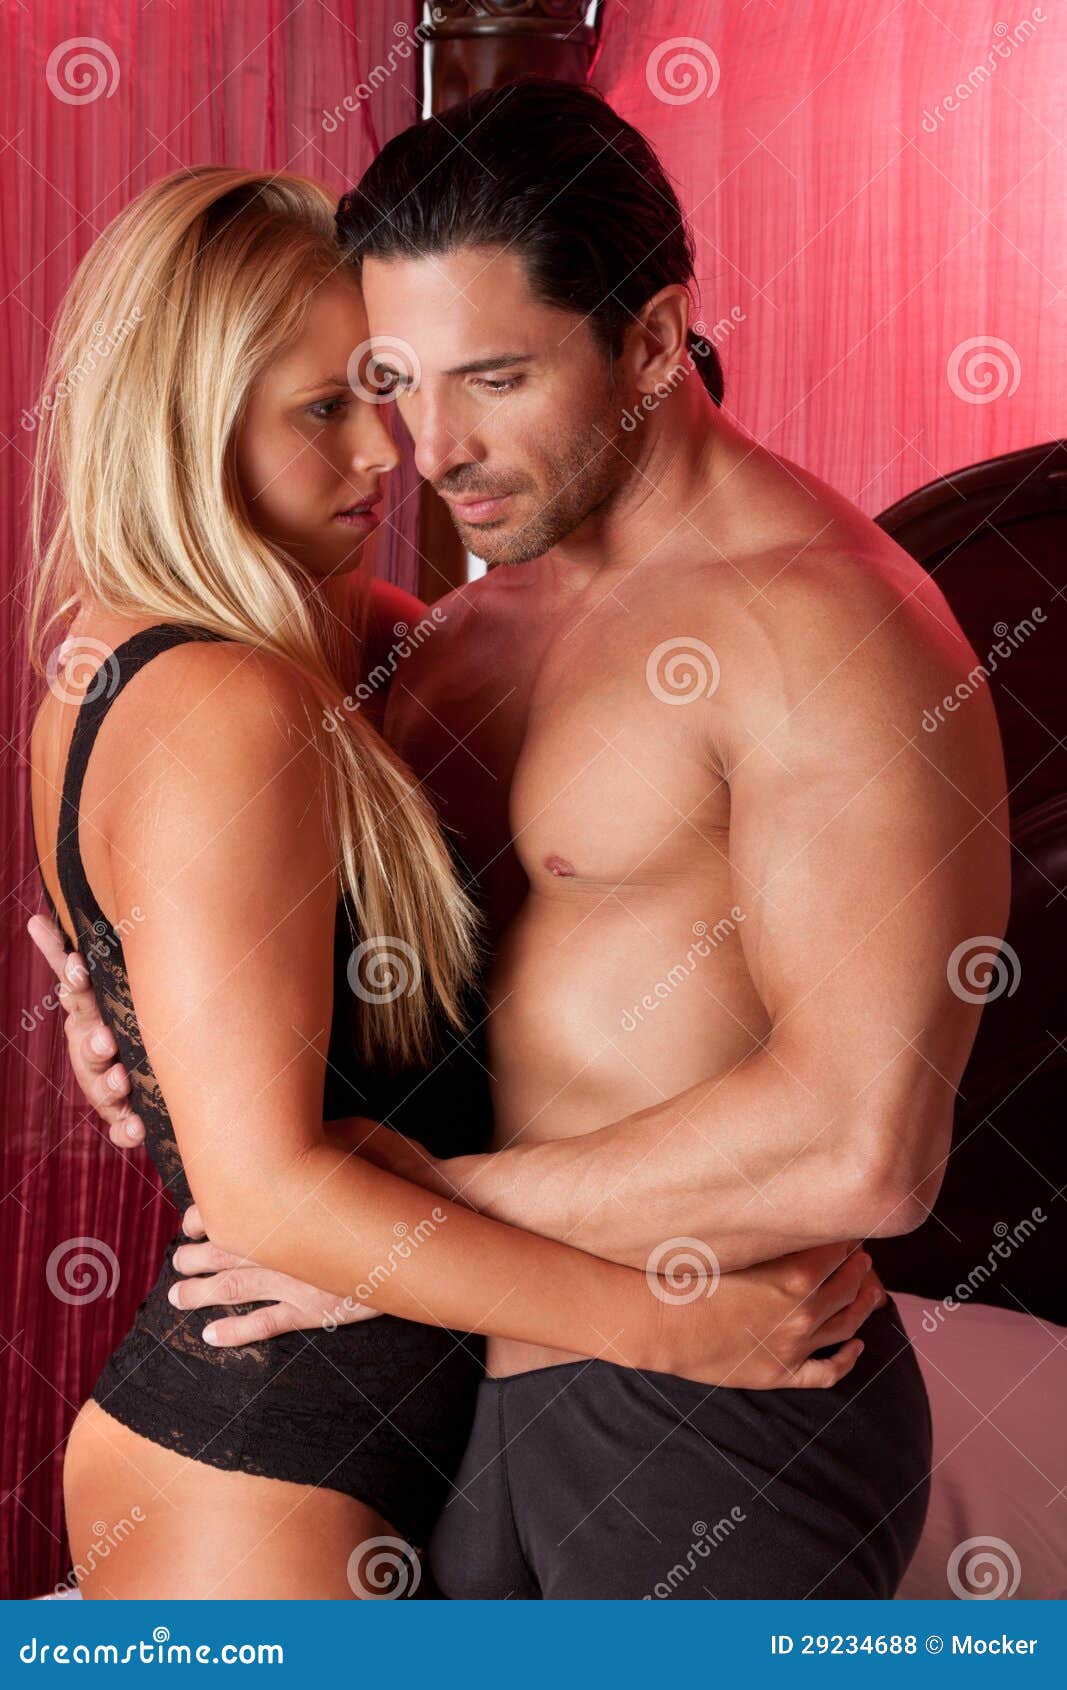 Nude Romance Bed - Loving Young Nude Erotic Sensual Couple in Bed Stock Photo - Image of adult,  affectionate: 29234688